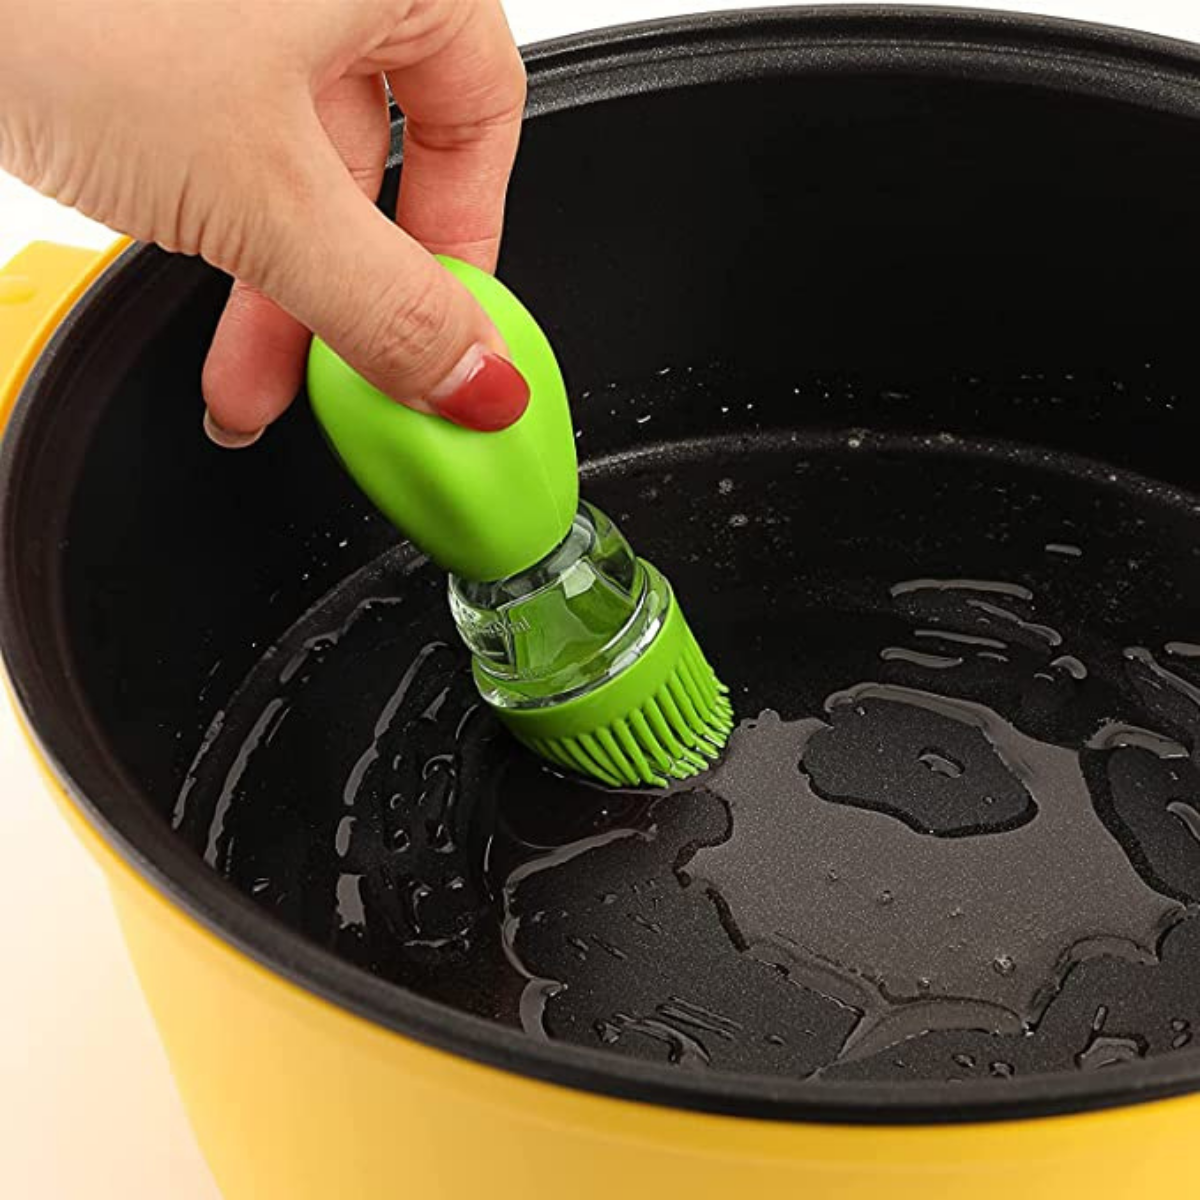 35 Ridiculously Useful Kitchen Products That Are Also All Too Cheap For You To Regret Buying